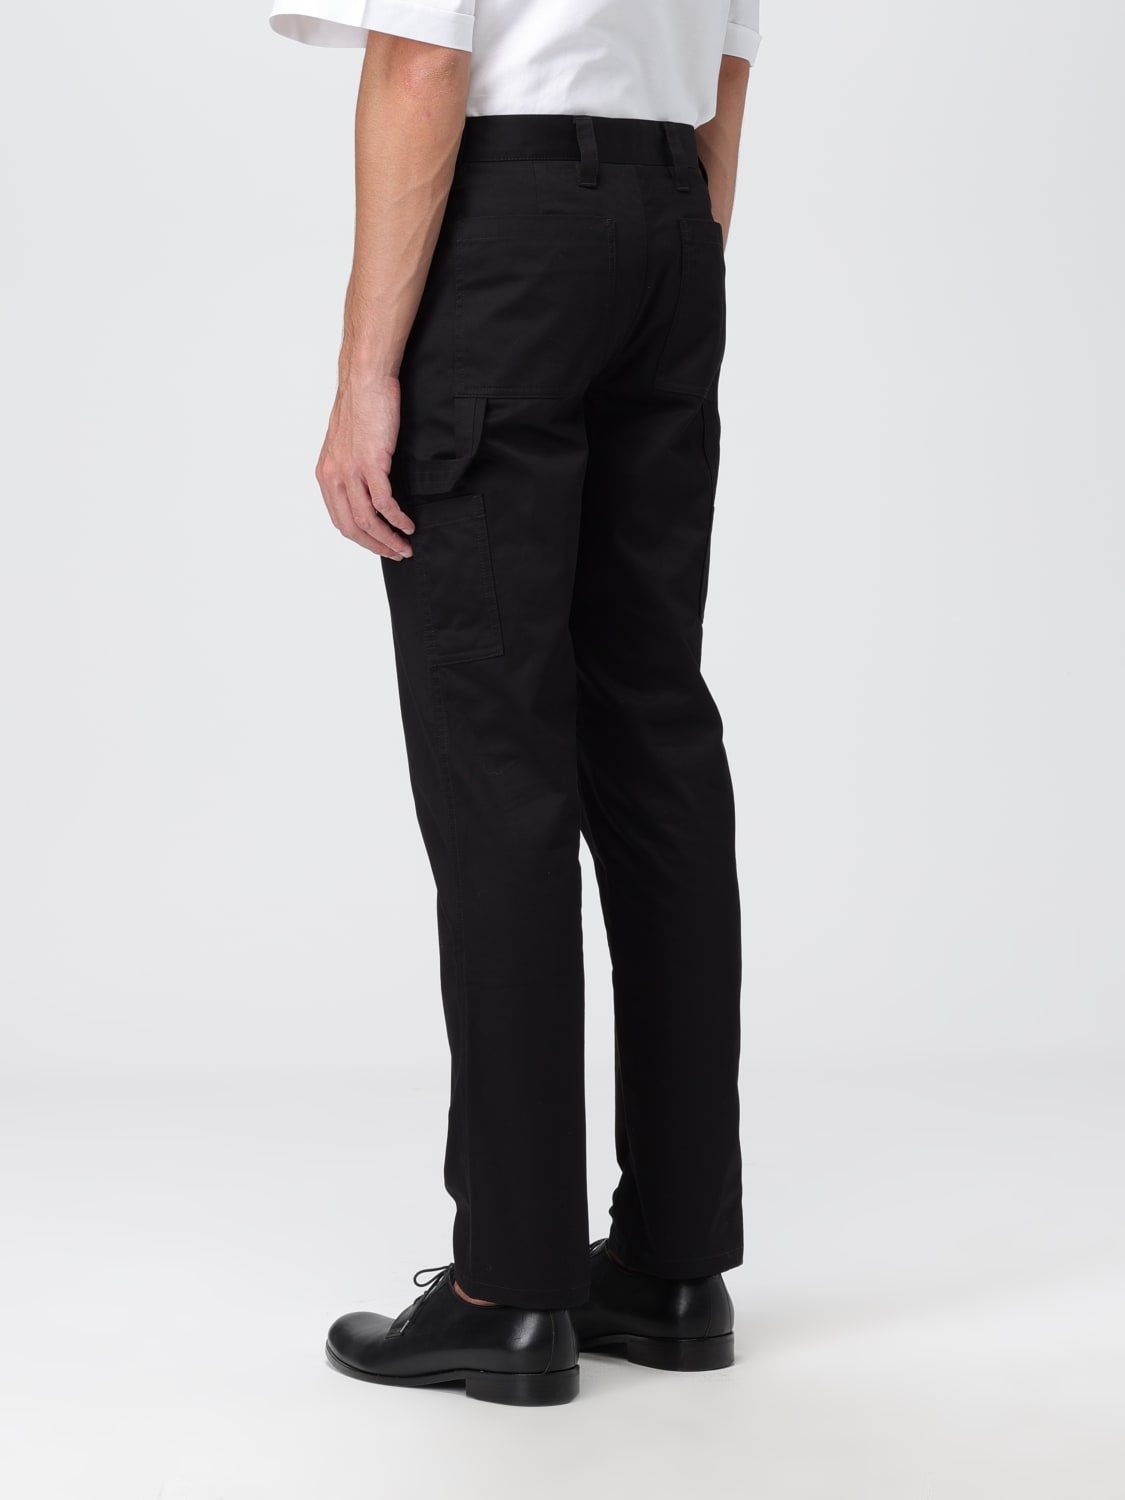 BURBERRY: men's pants - Black | Burberry pants 8070608 online at GIGLIO.COM